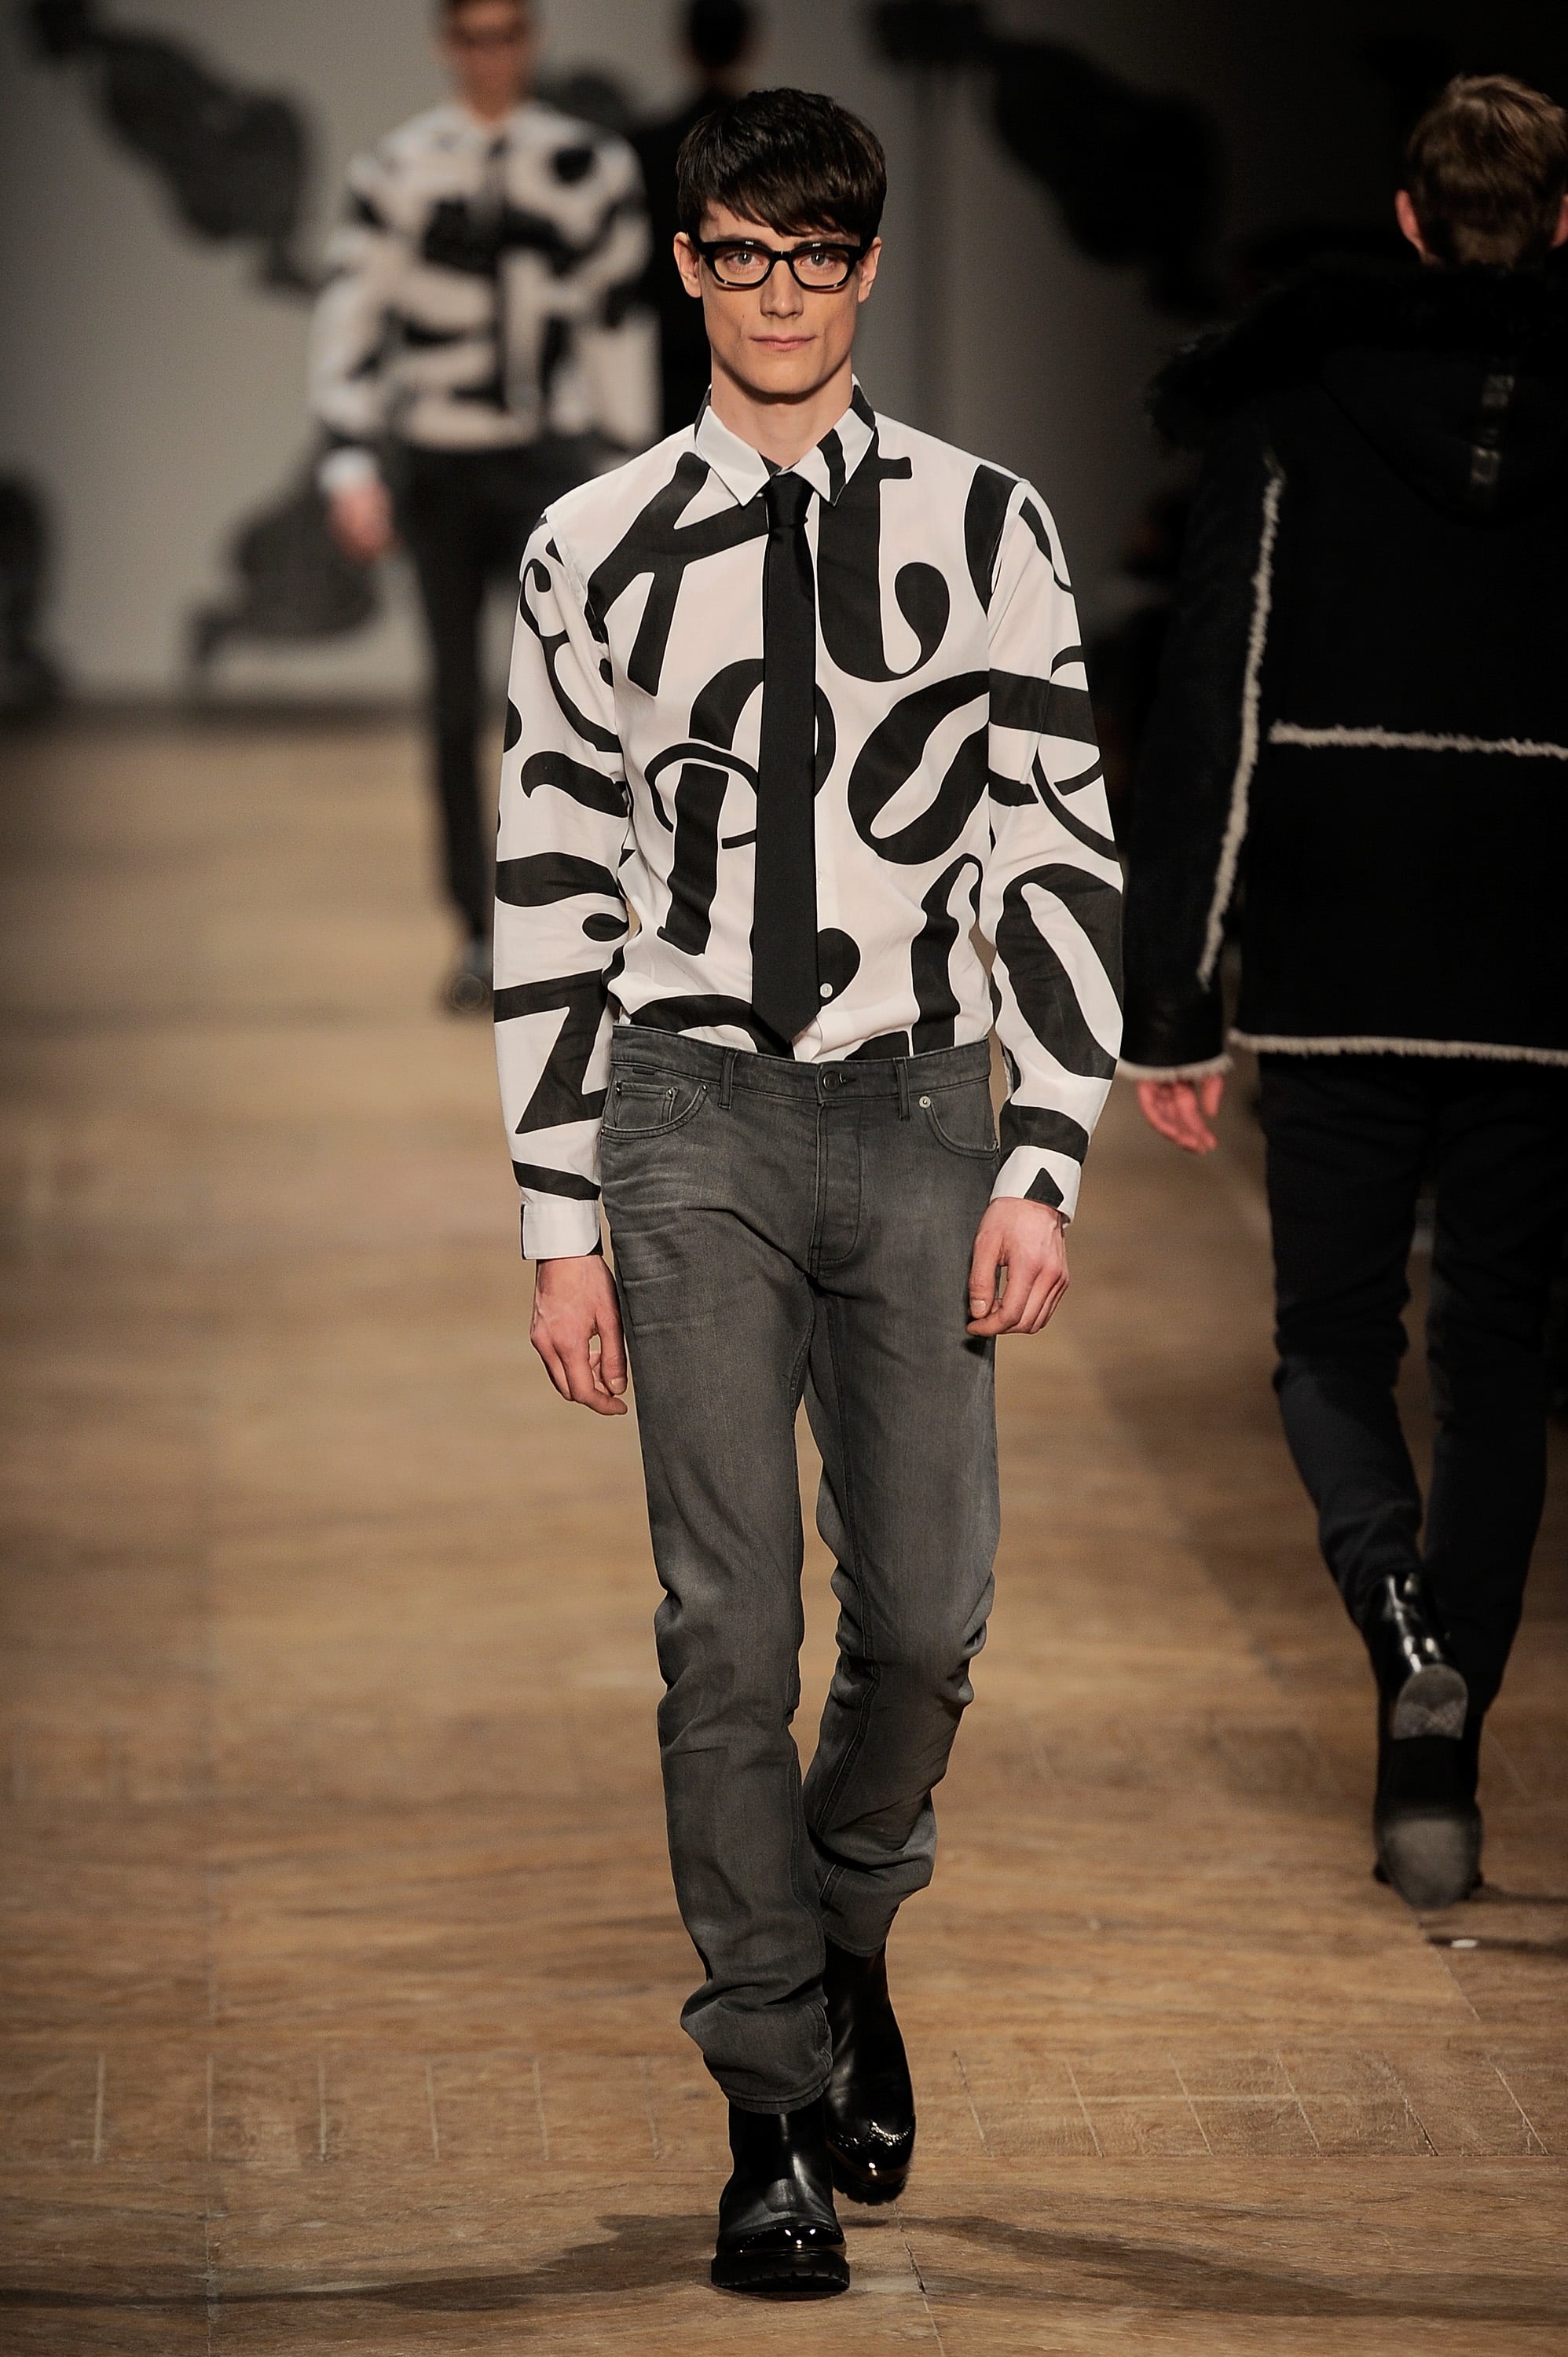 Crazy Fashion From the Men's Runway Shows | Fall 2013 | POPSUGAR 